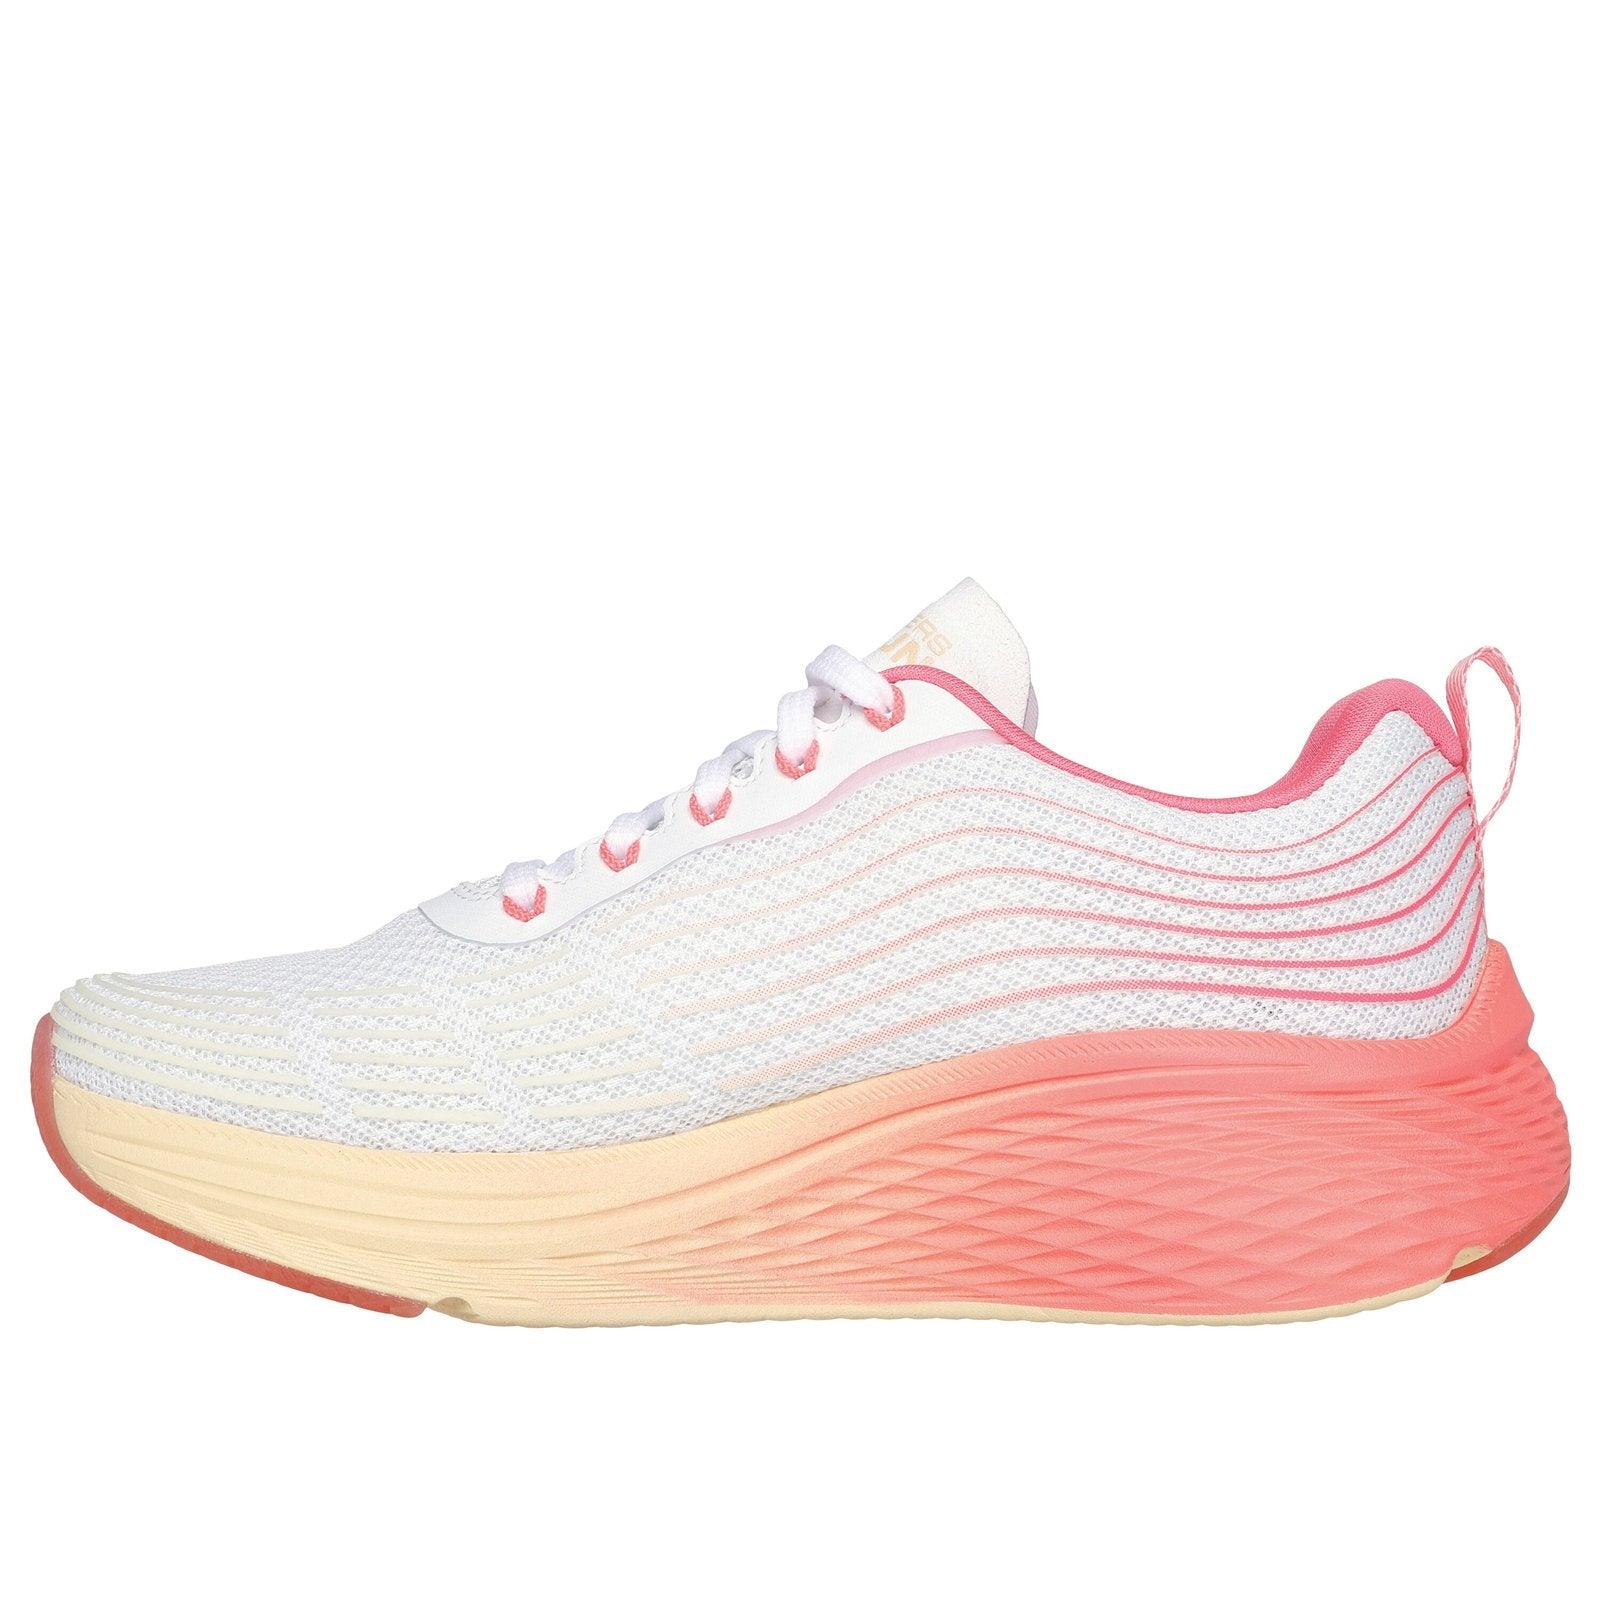 Skechers W Max Coushioning Elote 2.0 White Pink